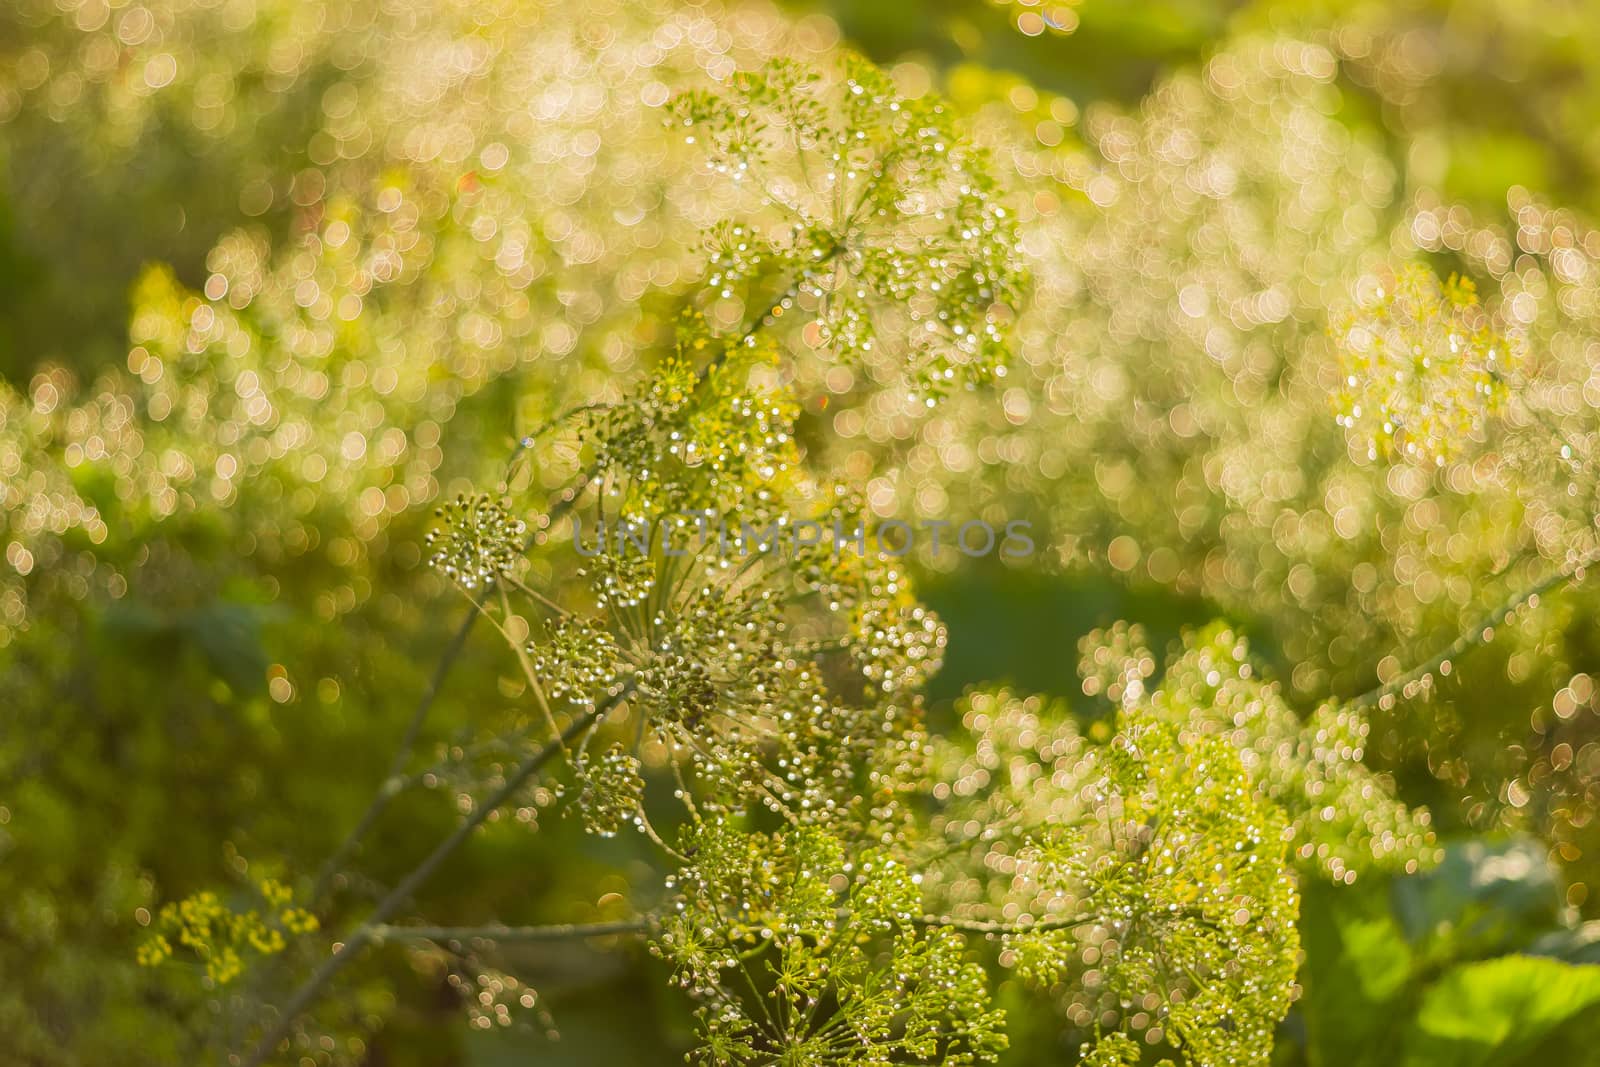 Dill inflorescences with droplets of dew on blurred background by anmbph